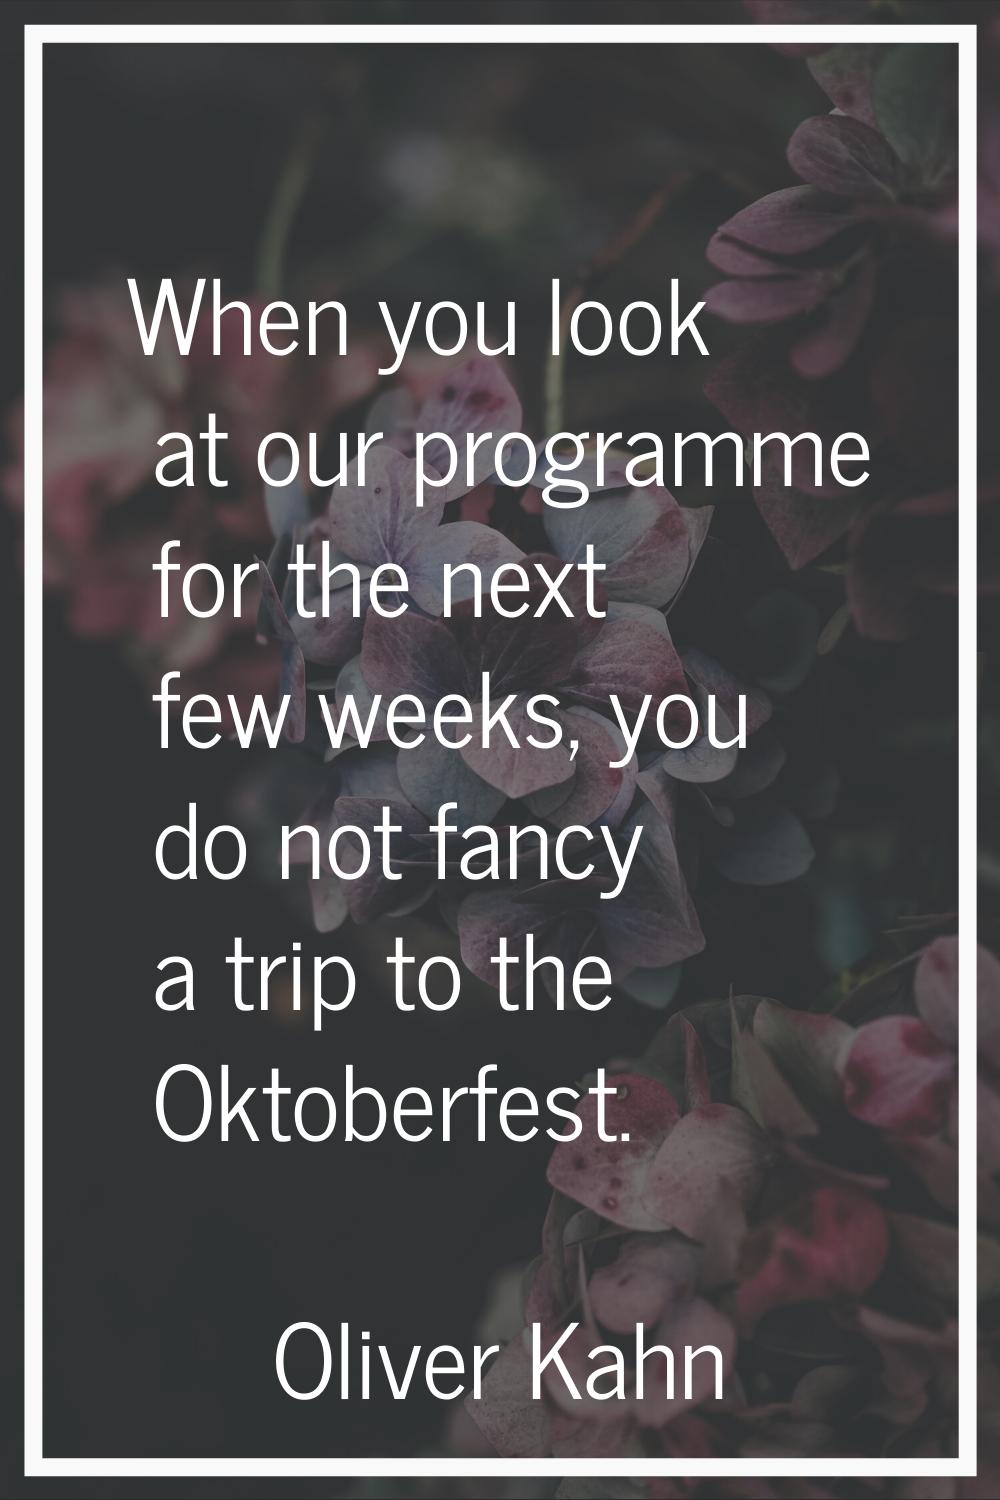 When you look at our programme for the next few weeks, you do not fancy a trip to the Oktoberfest.